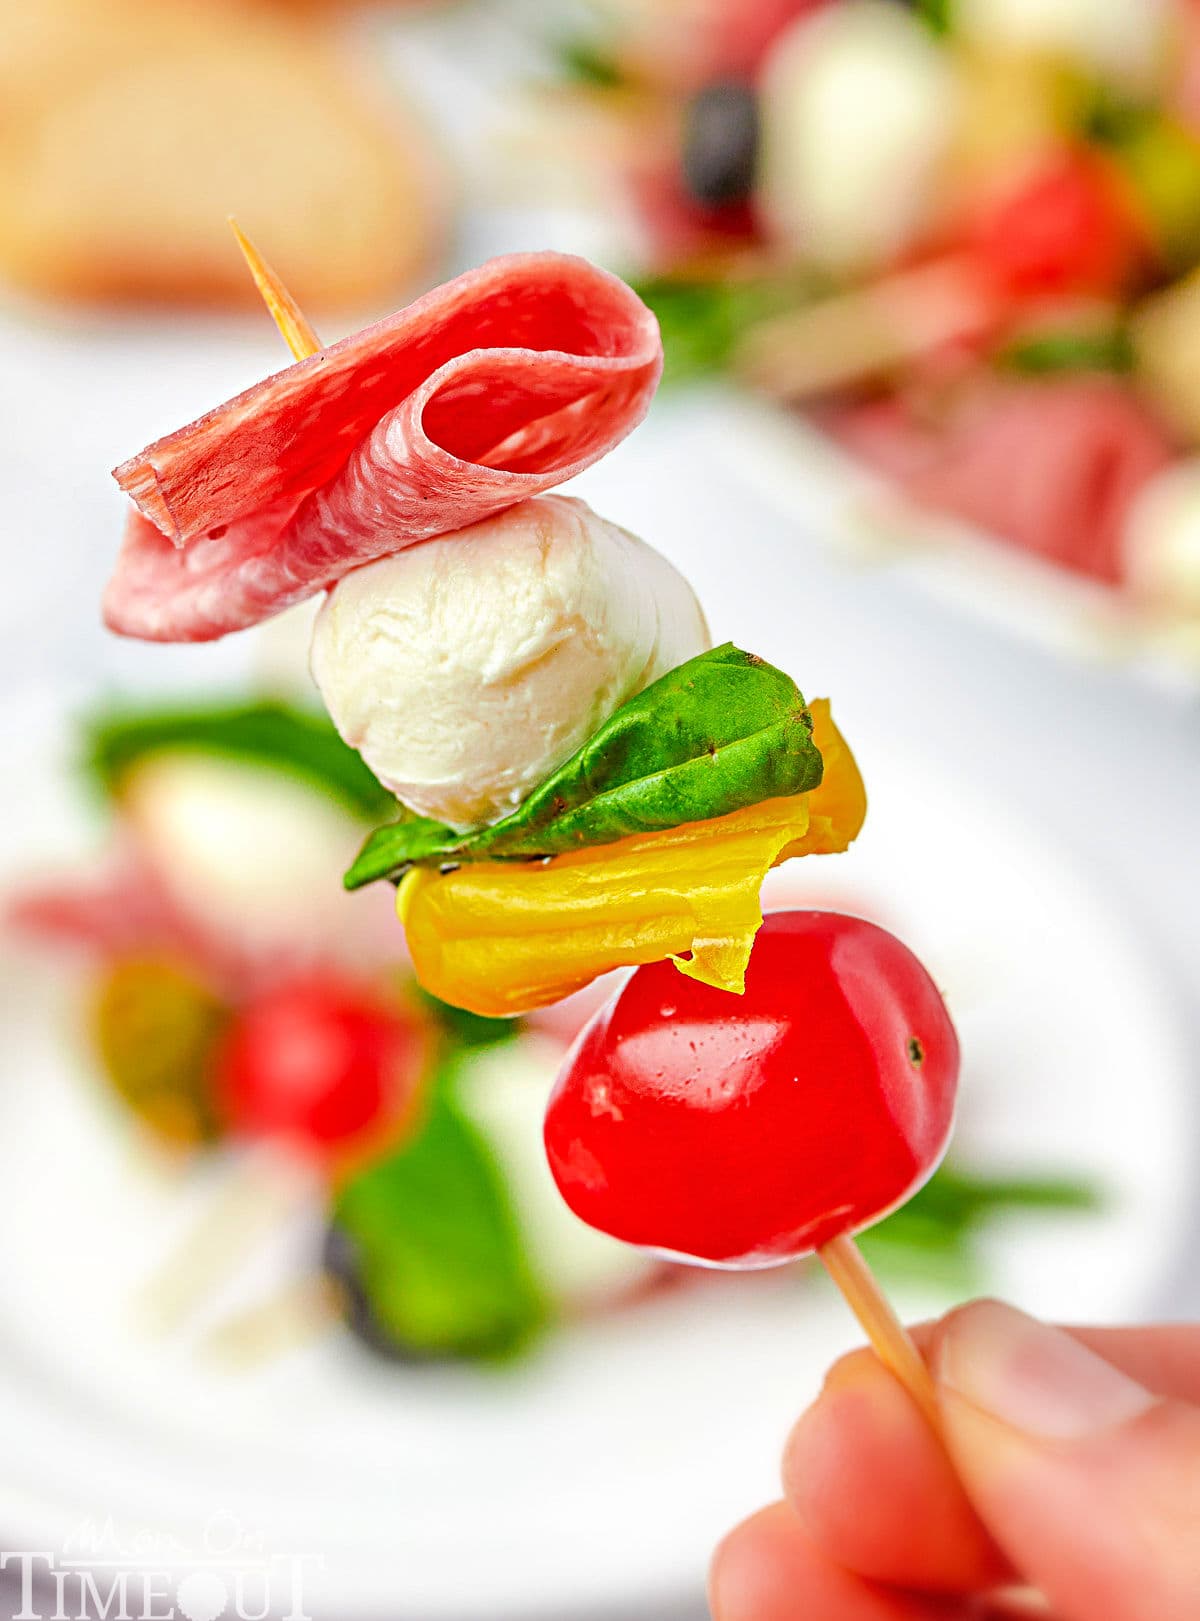 one antipasto skewer being held up over a plate.